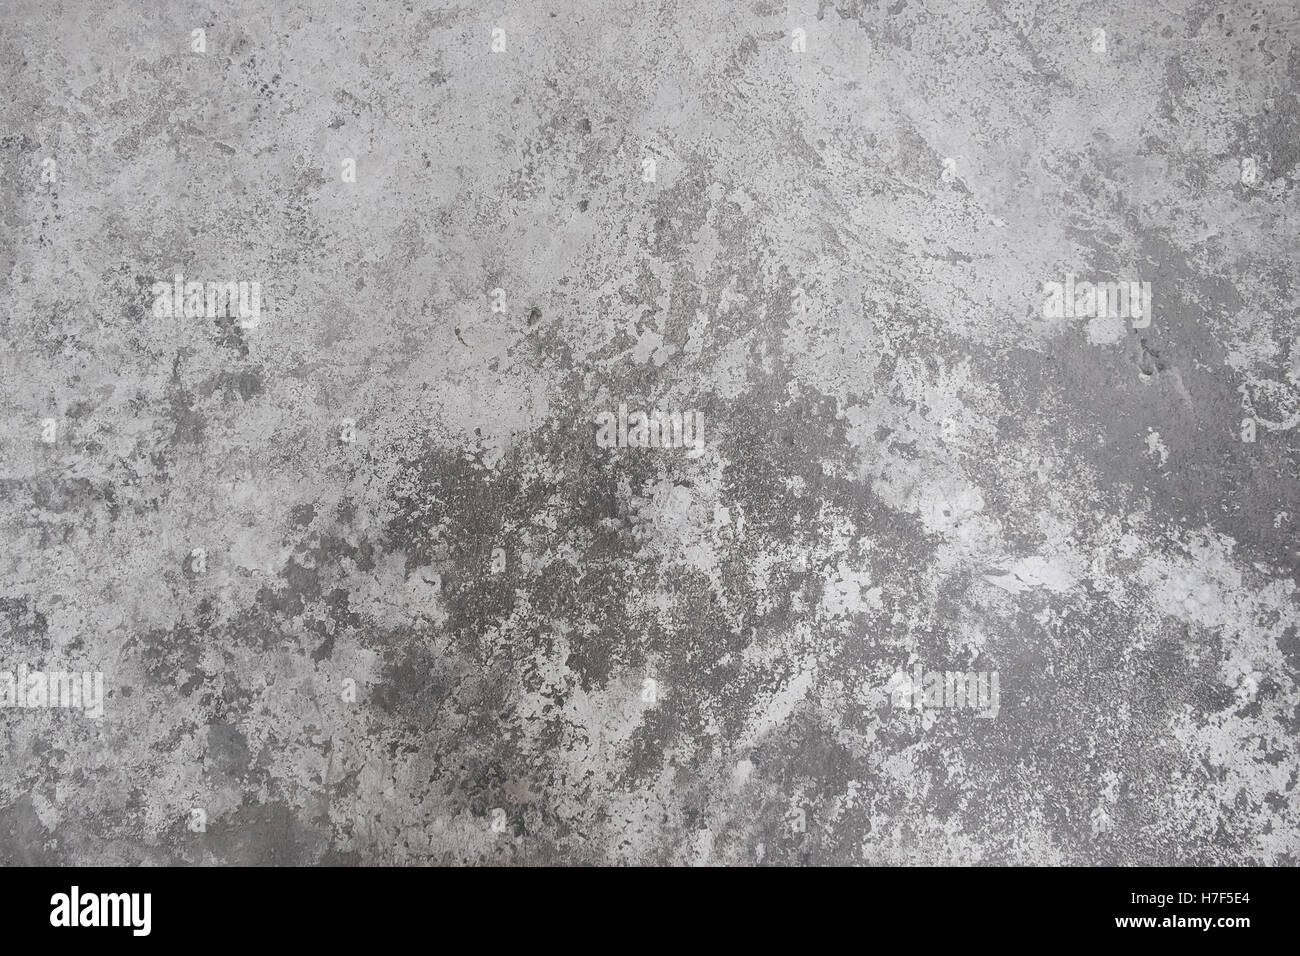 Polished Old Grey Concrete Floor Texture Background Stock Photo